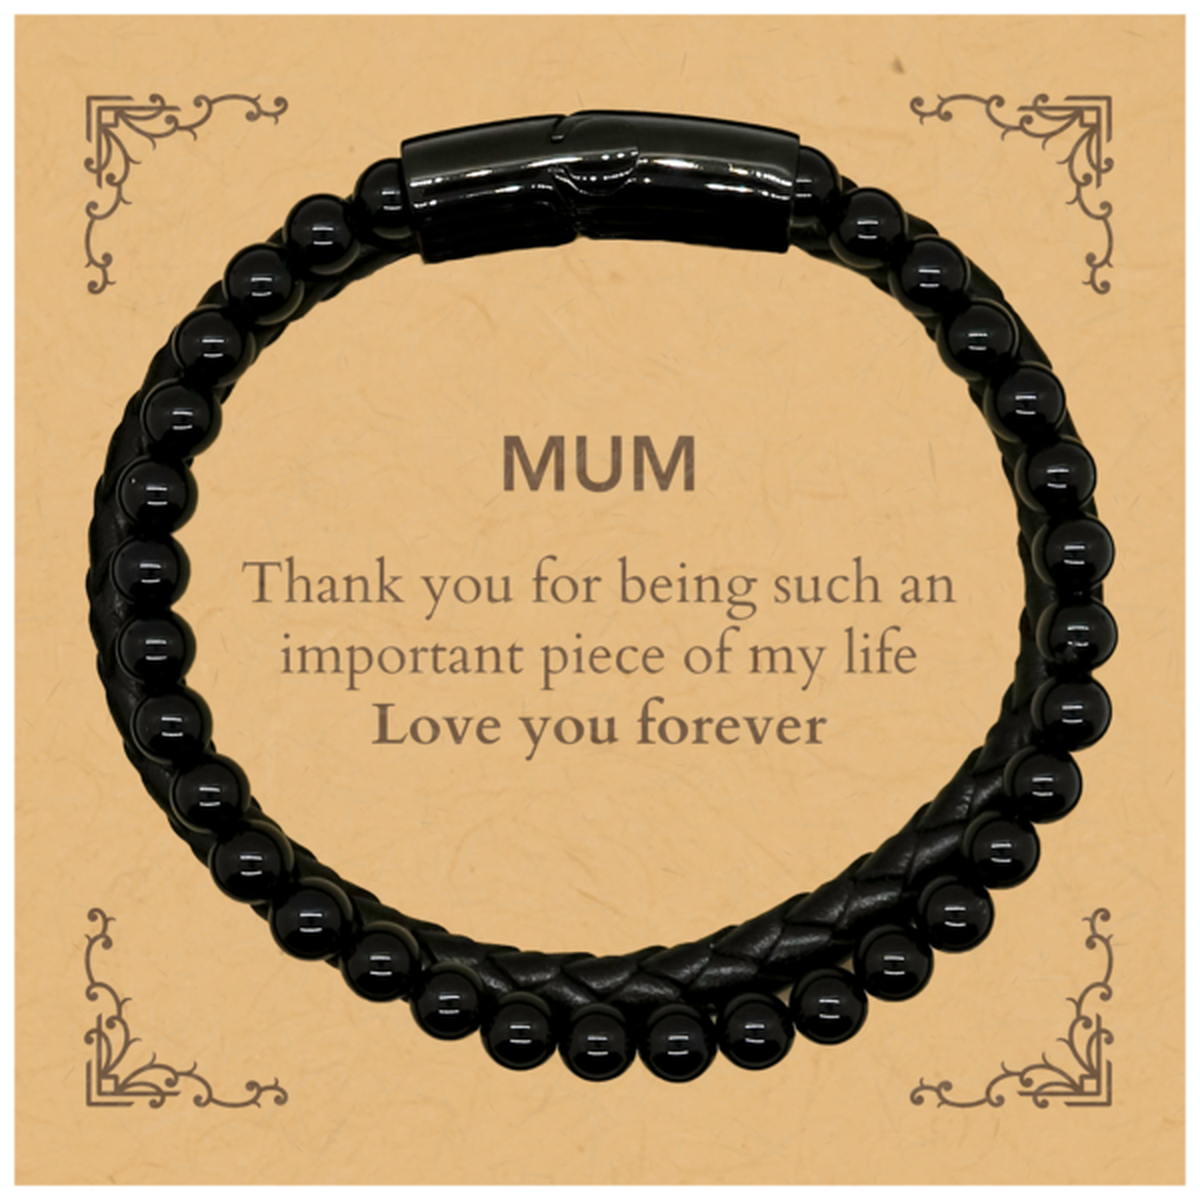 Appropriate Mum Stone Leather Bracelets Epic Birthday Gifts for Mum Thank you for being such an important piece of my life Mum Christmas Mothers Fathers Day